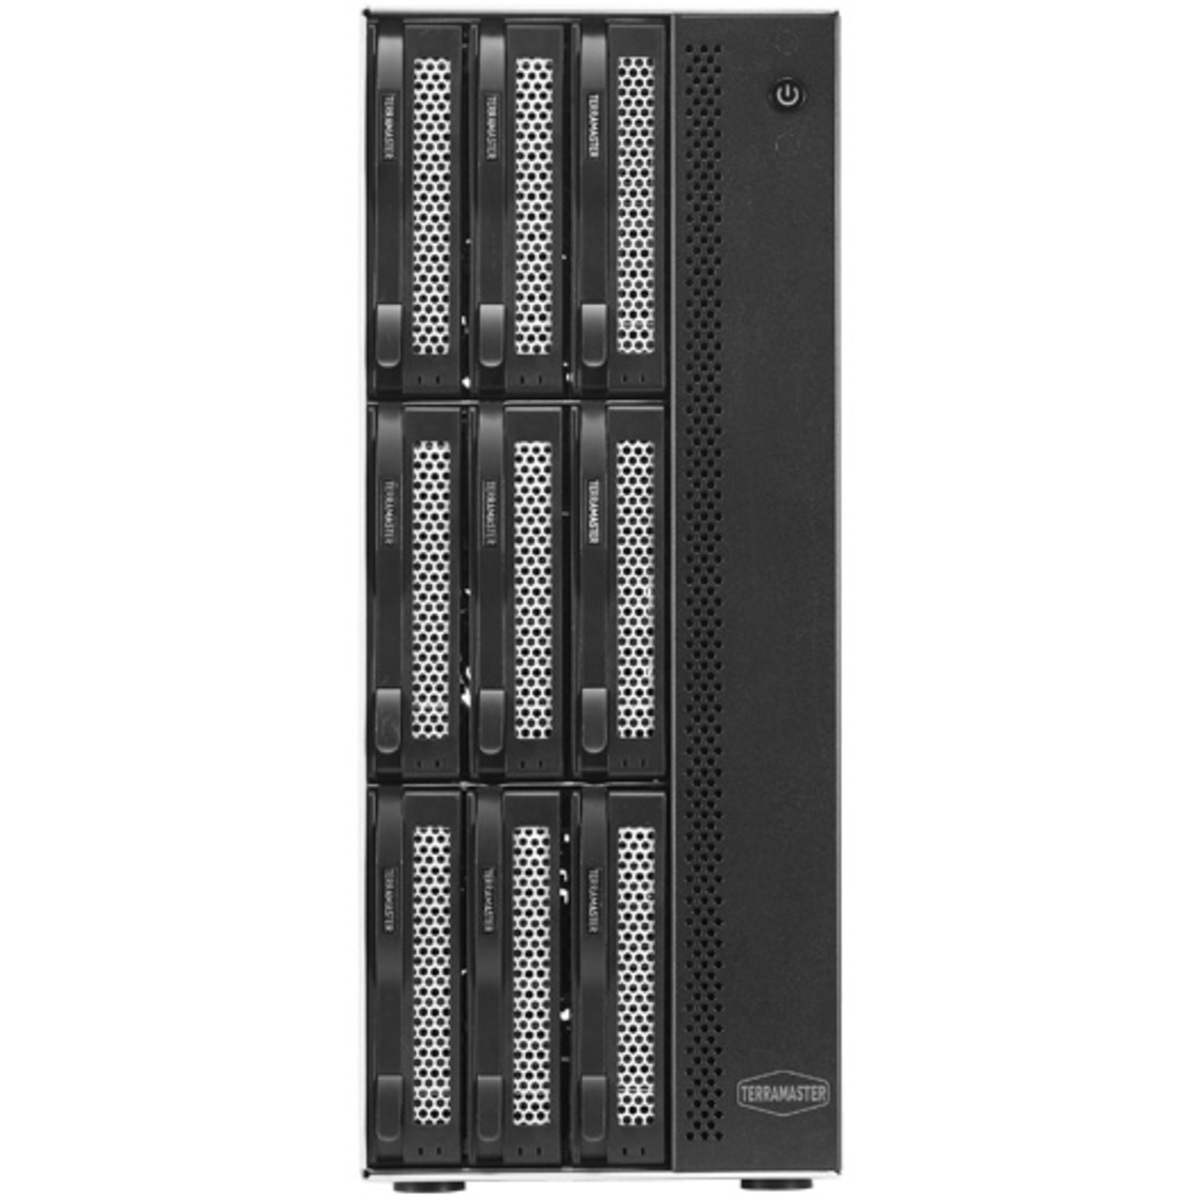 TerraMaster T9-423 132tb 9-Bay Desktop Multimedia / Power User / Business NAS - Network Attached Storage Device 6x22tb Seagate EXOS X22 ST22000NM001E 3.5 7200rpm SATA 6Gb/s HDD ENTERPRISE Class Drives Installed - Burn-In Tested T9-423